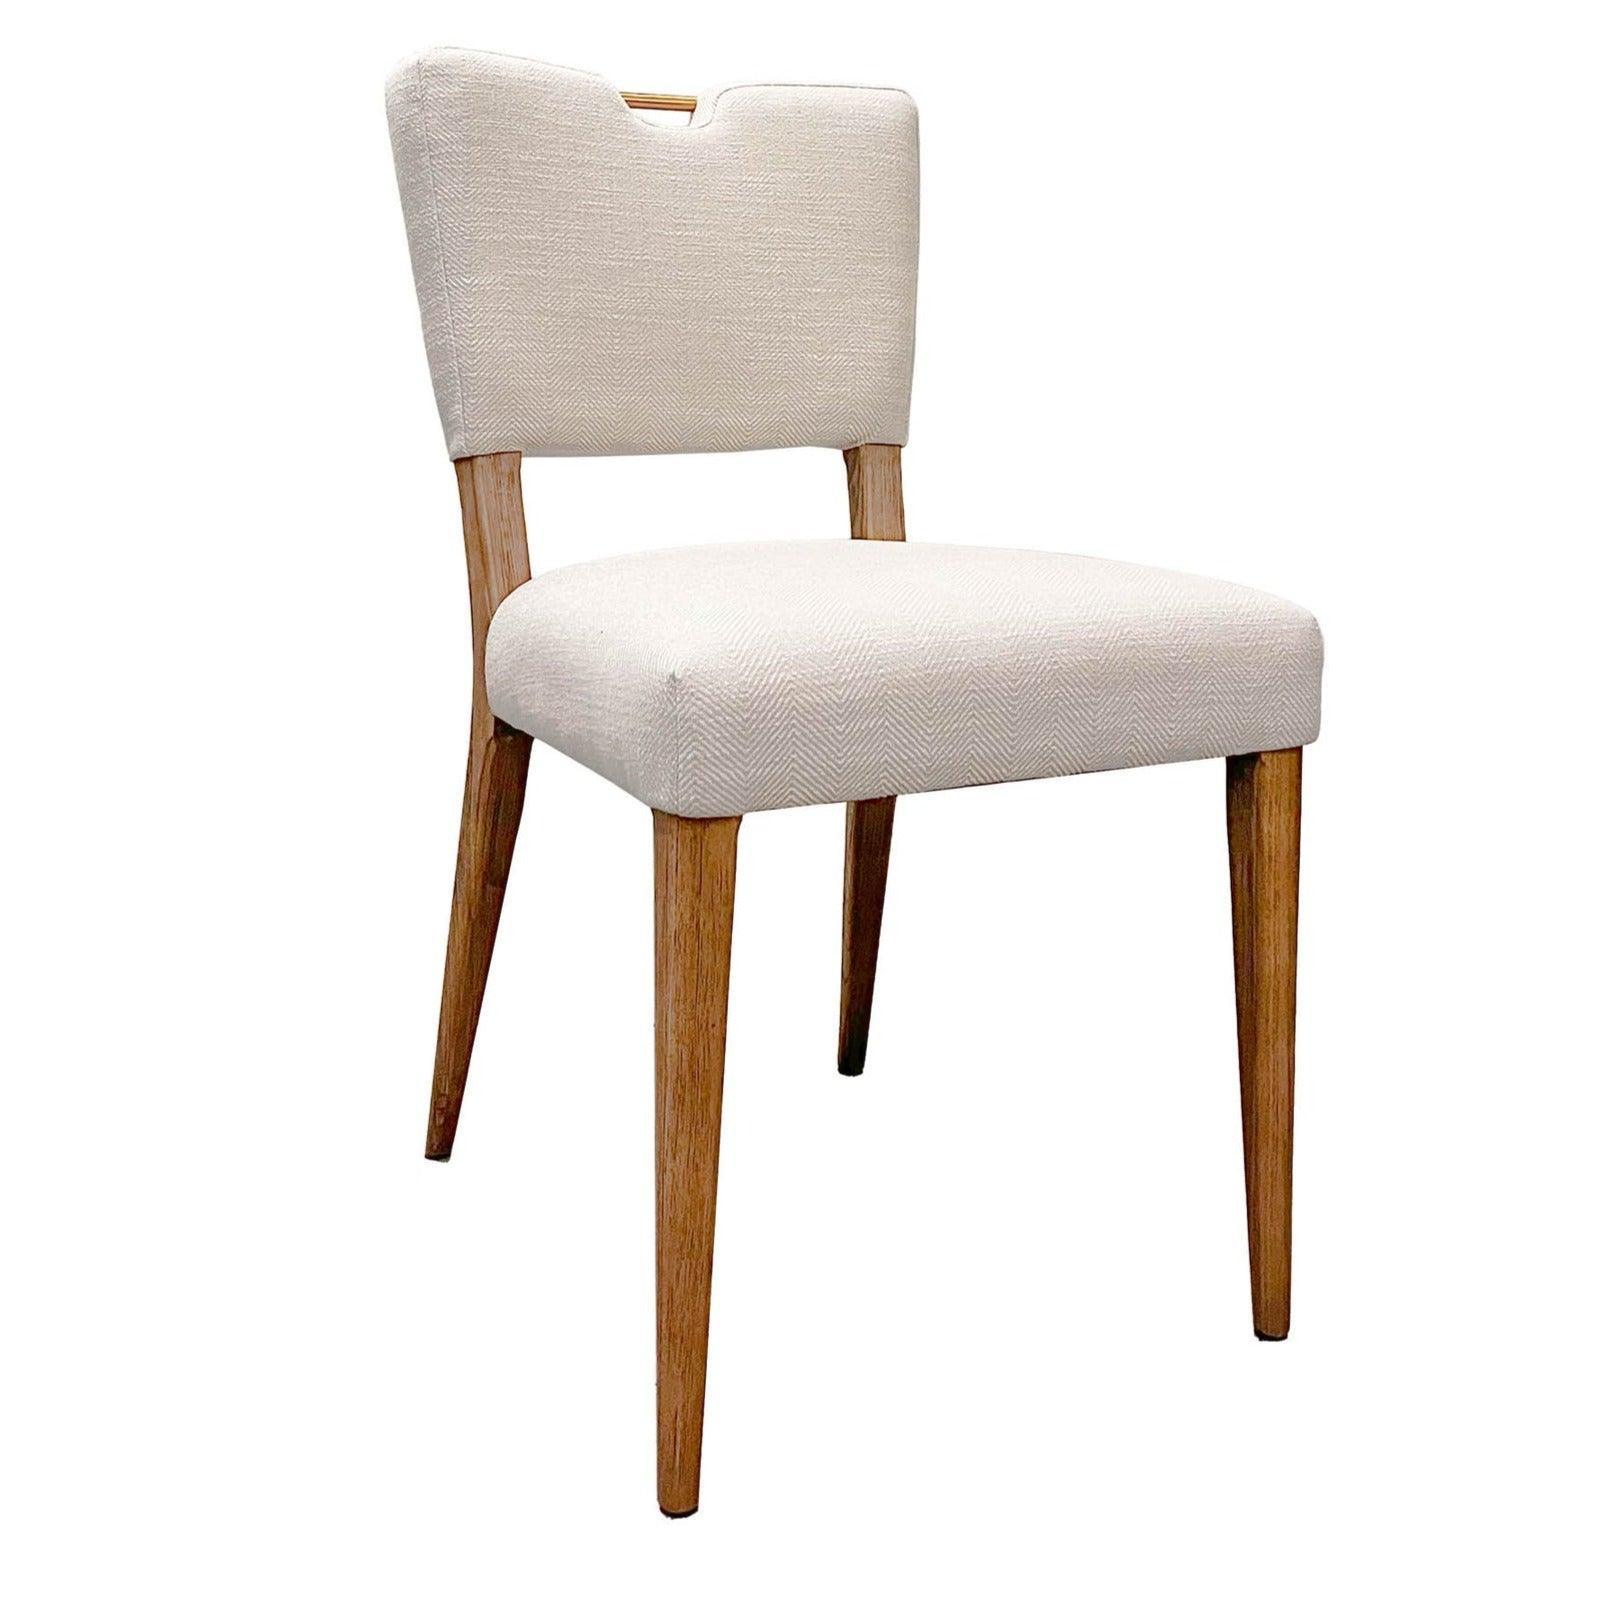 Luella Cream Linen Dining Chair 2PC Set Armless Floating Back - Sideboards and Things Accents_Black, Back Type_Floating Back, Back Type_With Back, Brand_LH Imports, Color_White, Legs Material_Wood, Number of Pieces_2PC Set, Product Type_Dining Height, Shape_Armless, Upholstery Type_Fabric Blend